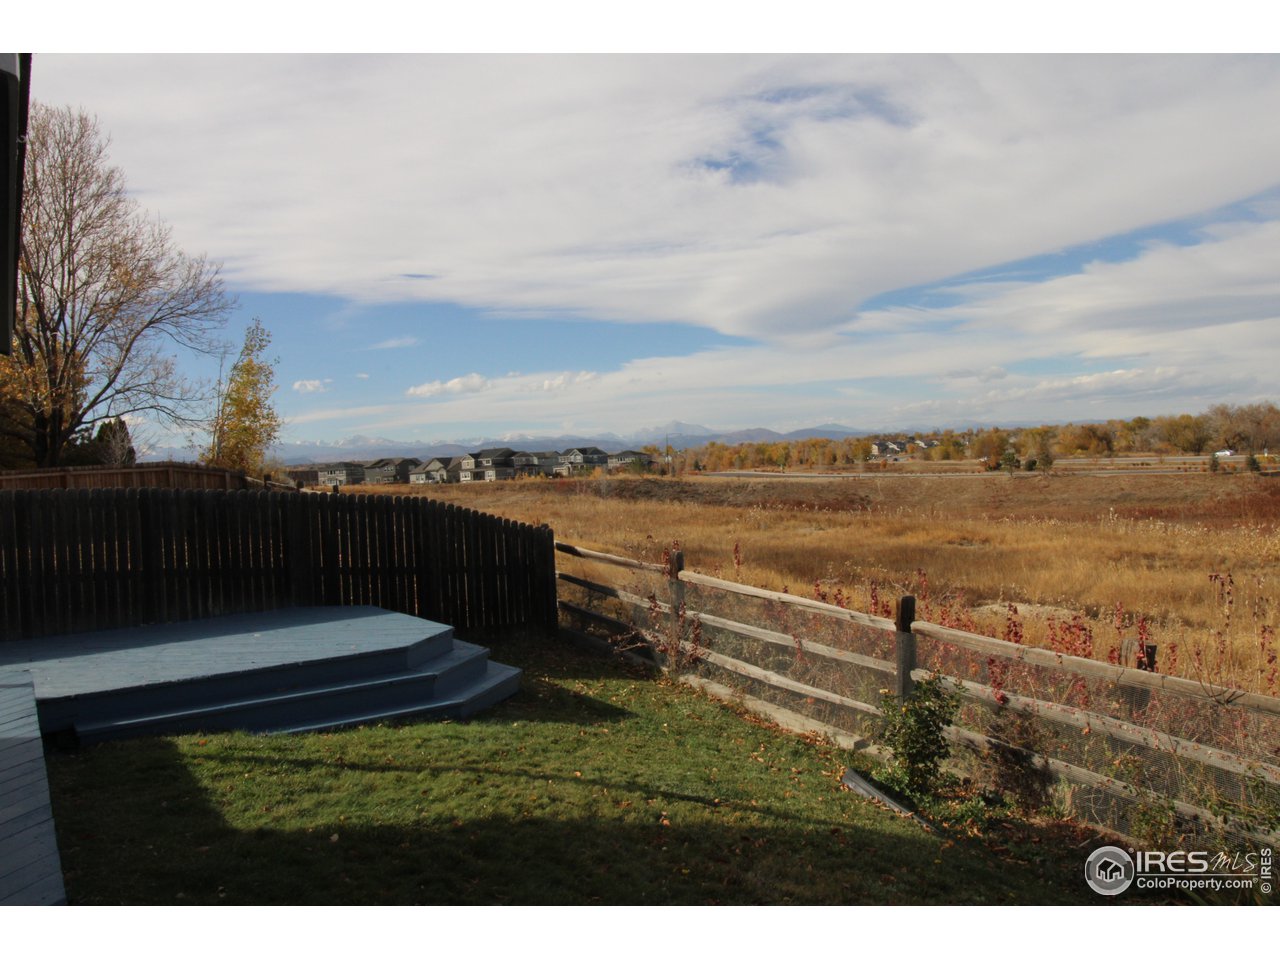 Enjoy the private back yard and the views of Longs Peak and the never summer range.